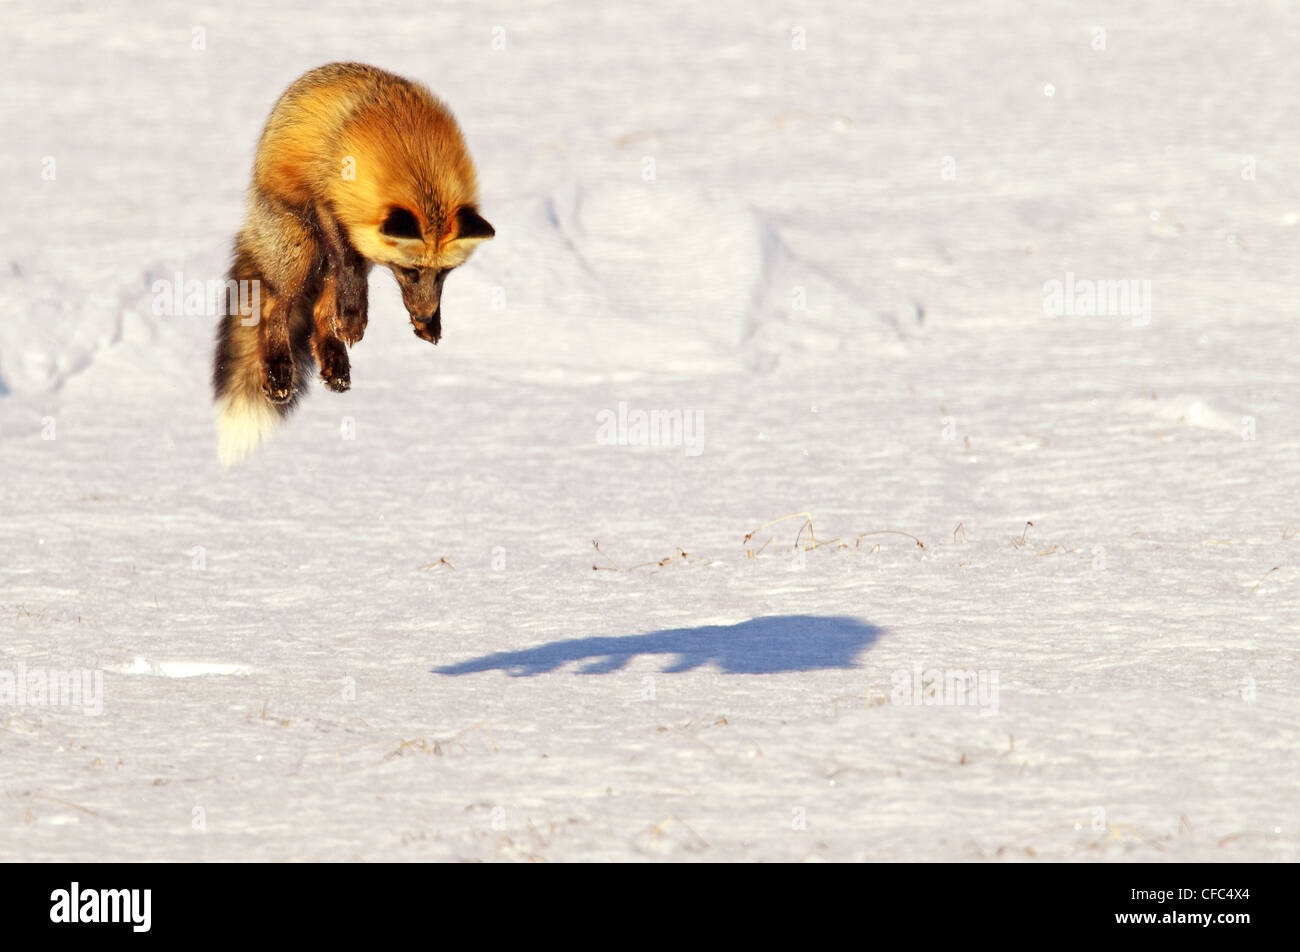 Fox leaping into the air as it is hunting rodents, Yukon Territory, Canada. Stock Photo